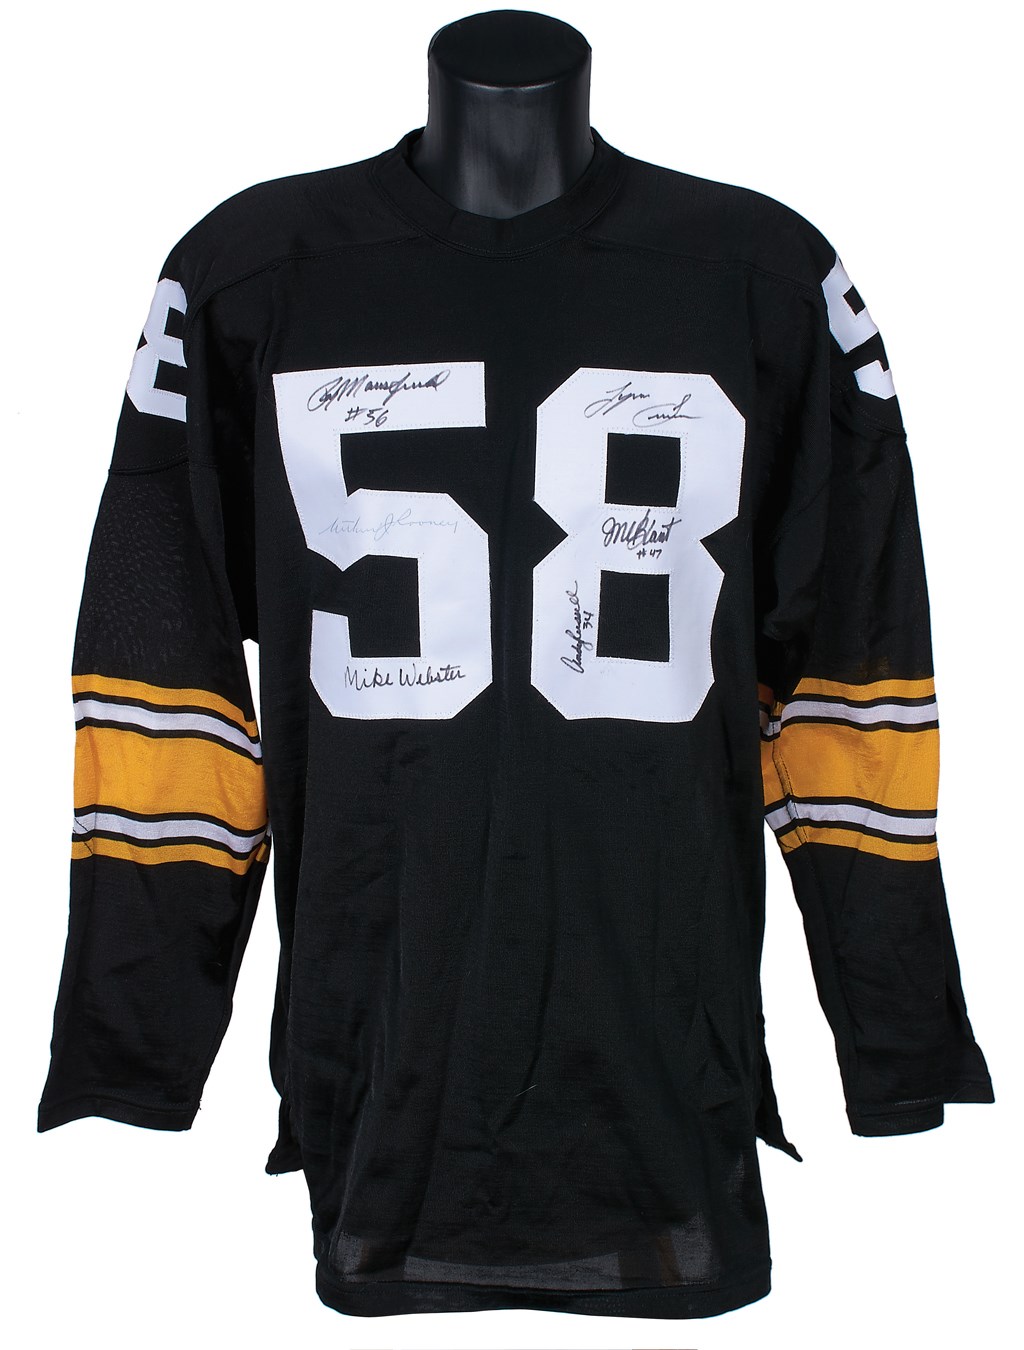 Pittsburgh Steelers Hall of Famers and Stars Signed Jersey with Art Rooney